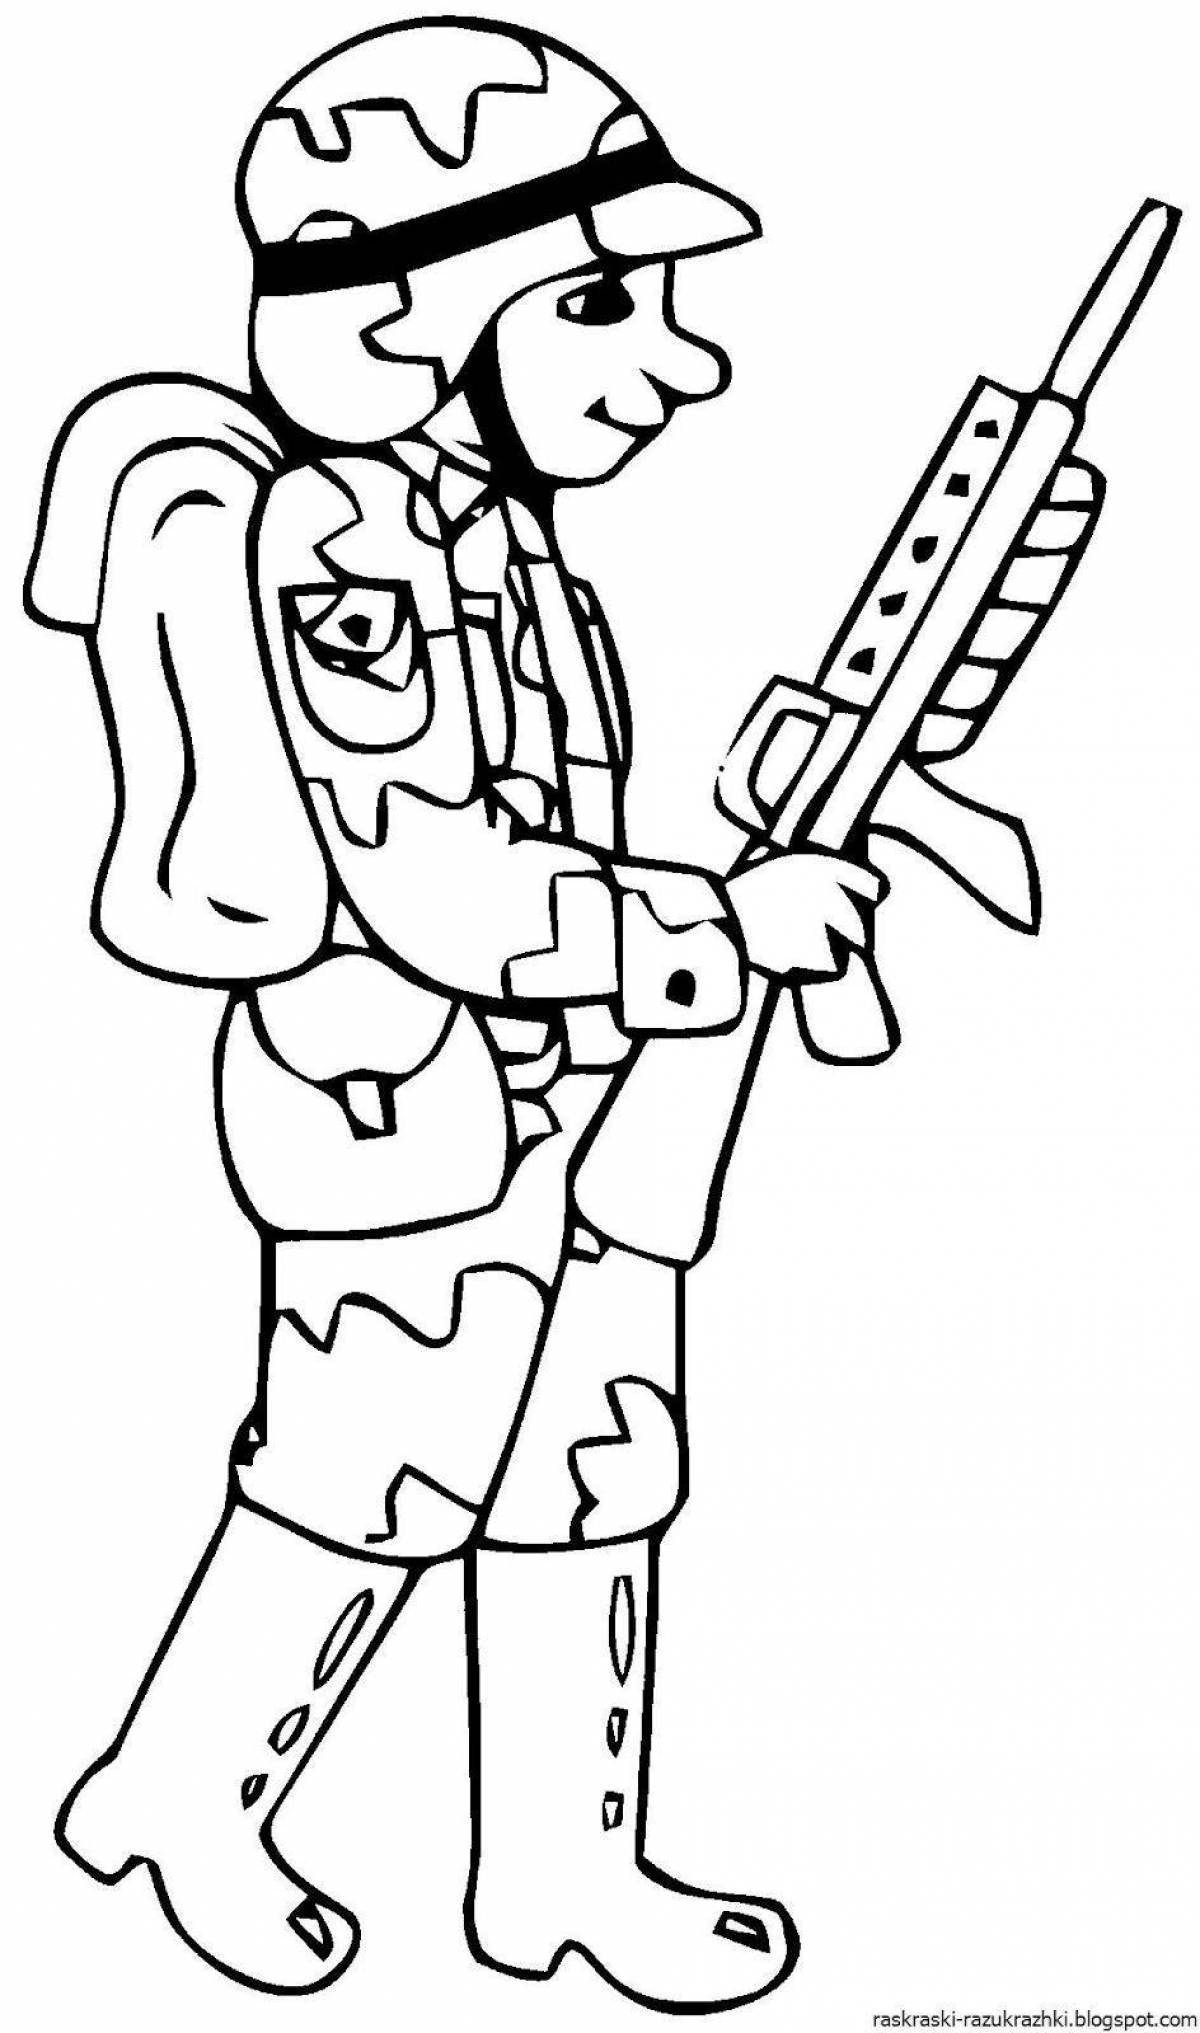 An interesting coloring book of soldiers for children 3-4 years old